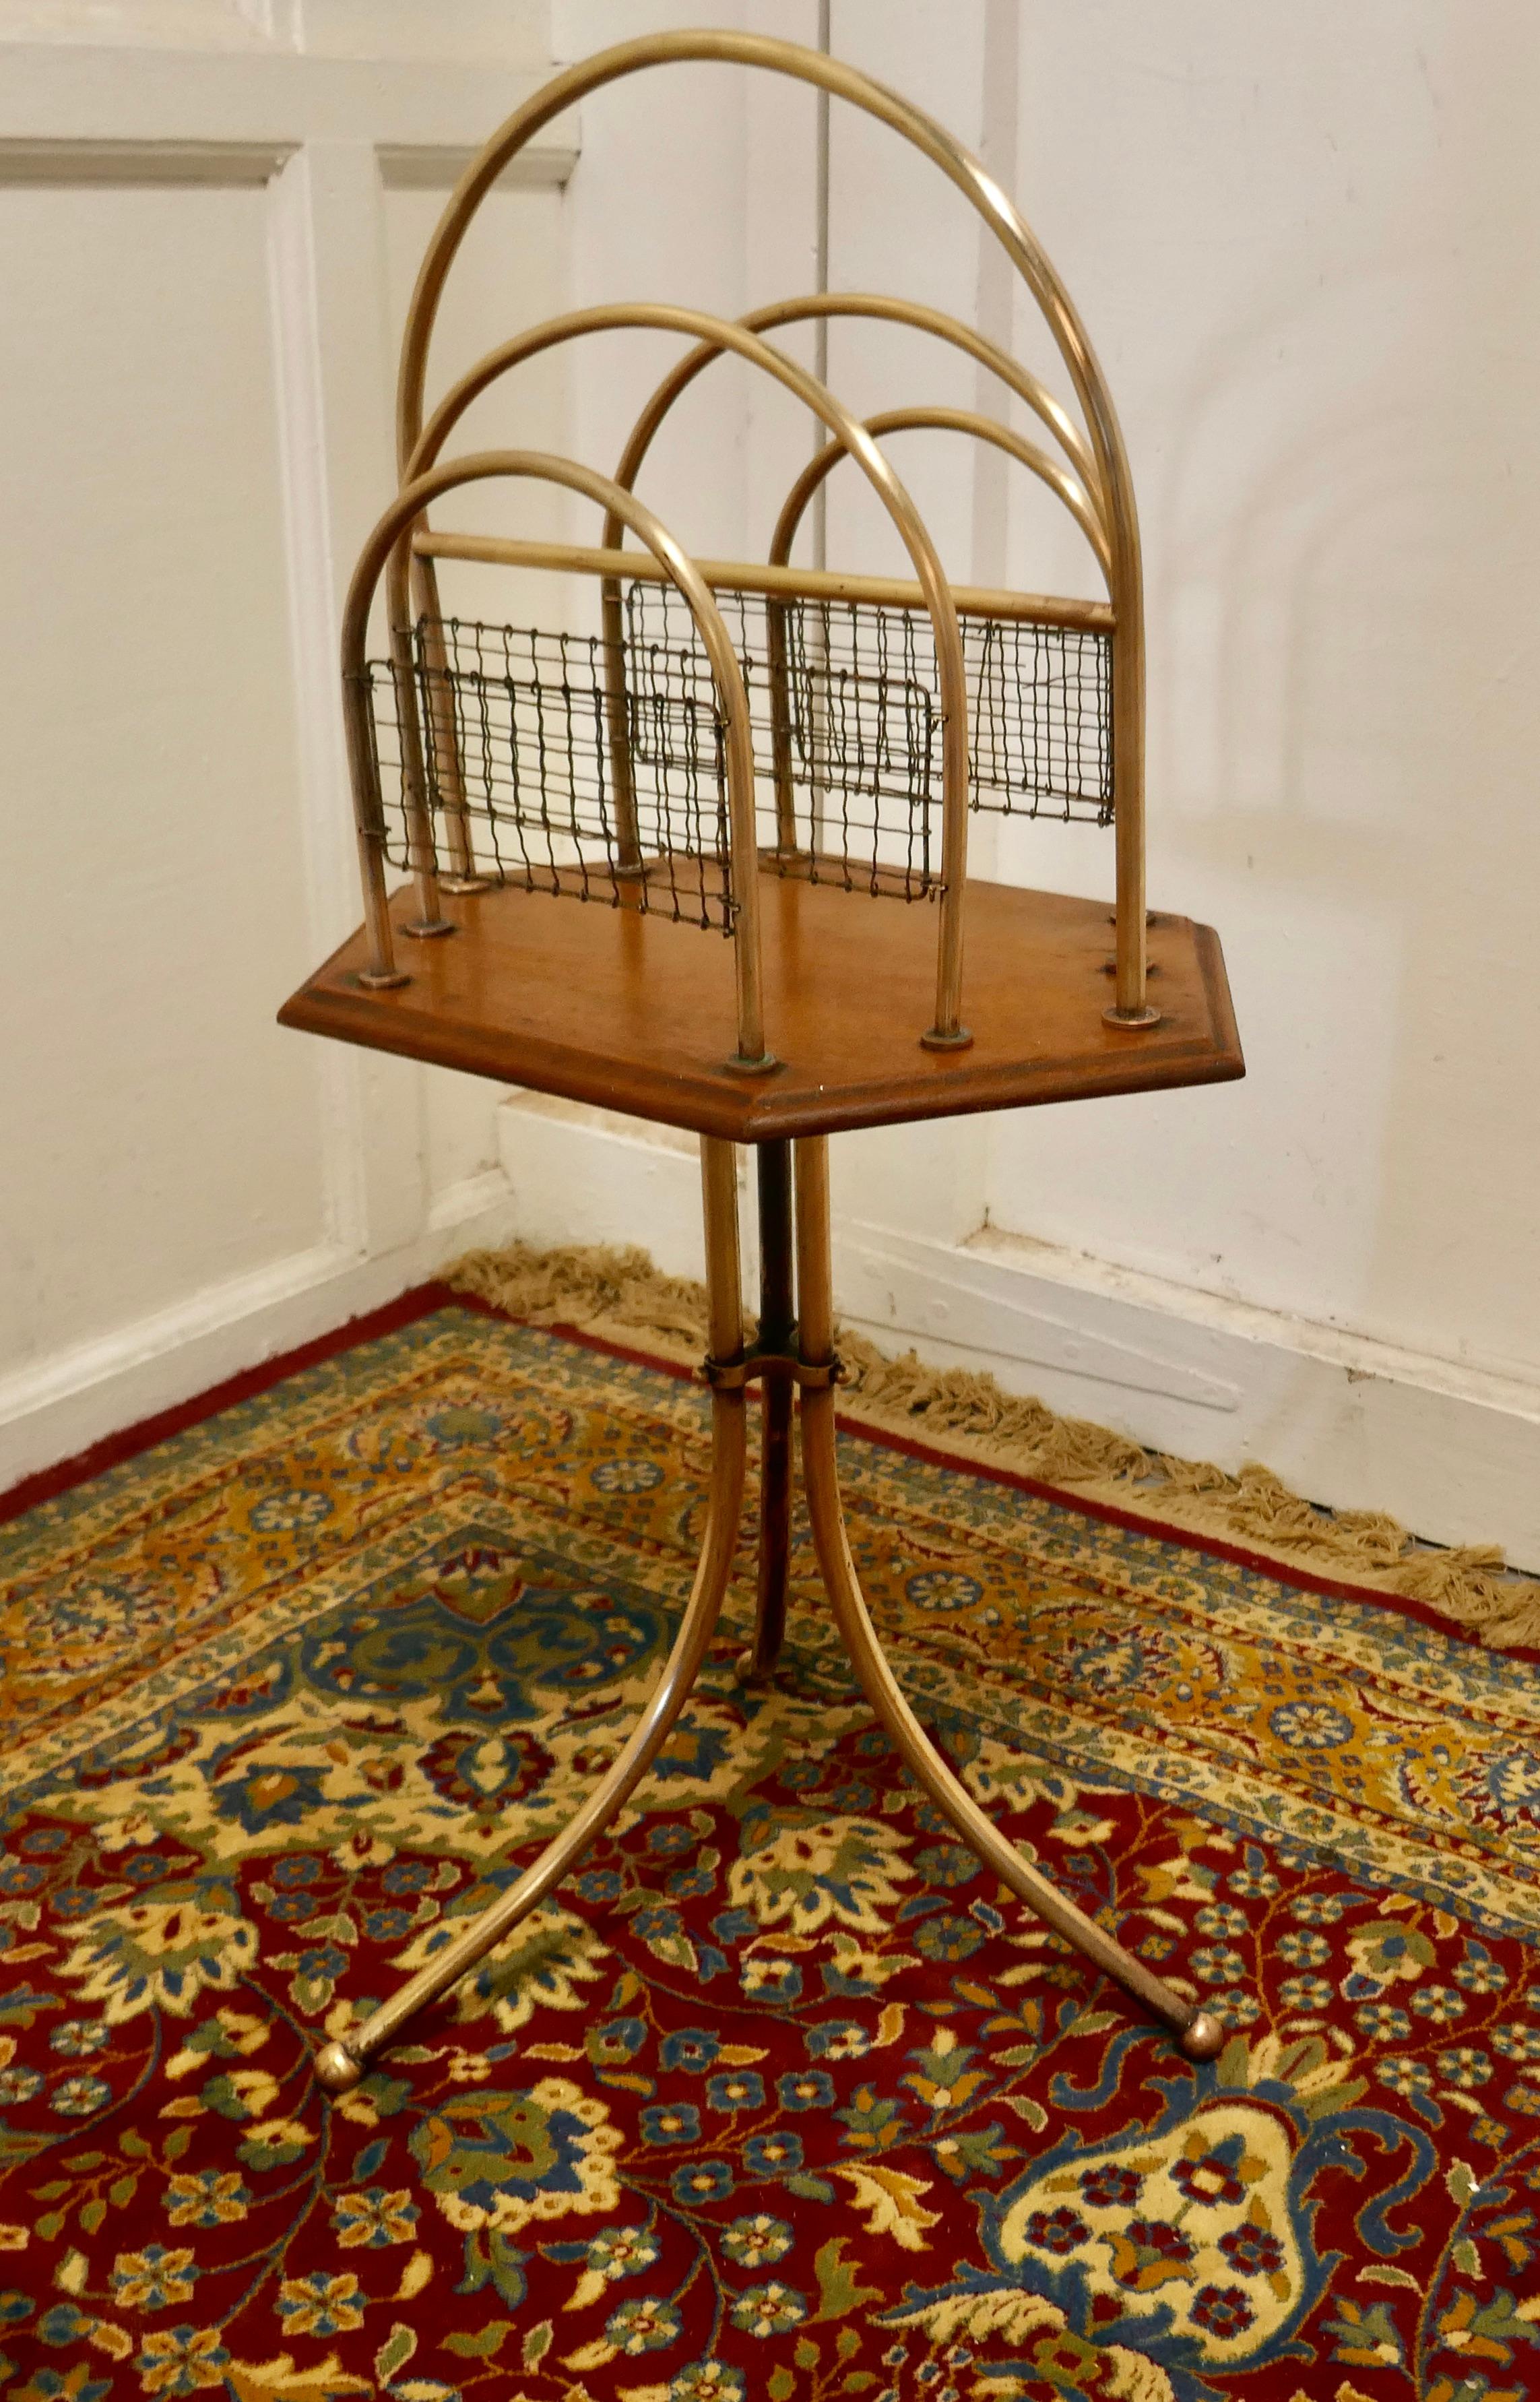 Elegant Victorian Golden Oak and Brass Revolving Magazine Rack


This is a very attractive hooped brass magazine rack it is set onto a Golden Oak base which sits on a three legged brass stand 
The Rack has 5 large brass hoops and mesh infill and it